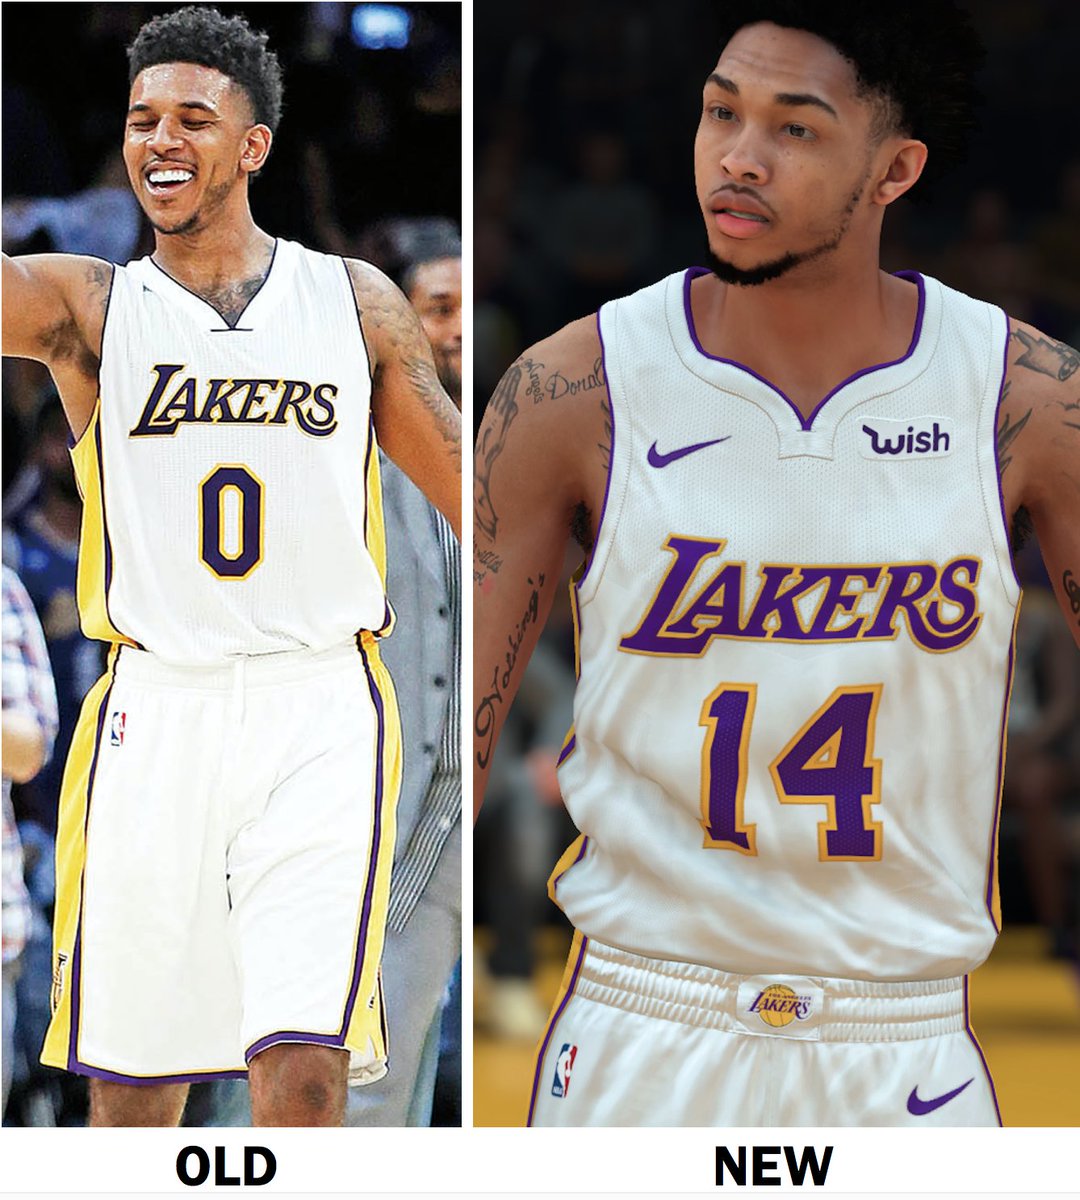 Well the 2022-23 Lakers uniforms were leaked 👀 No more white on